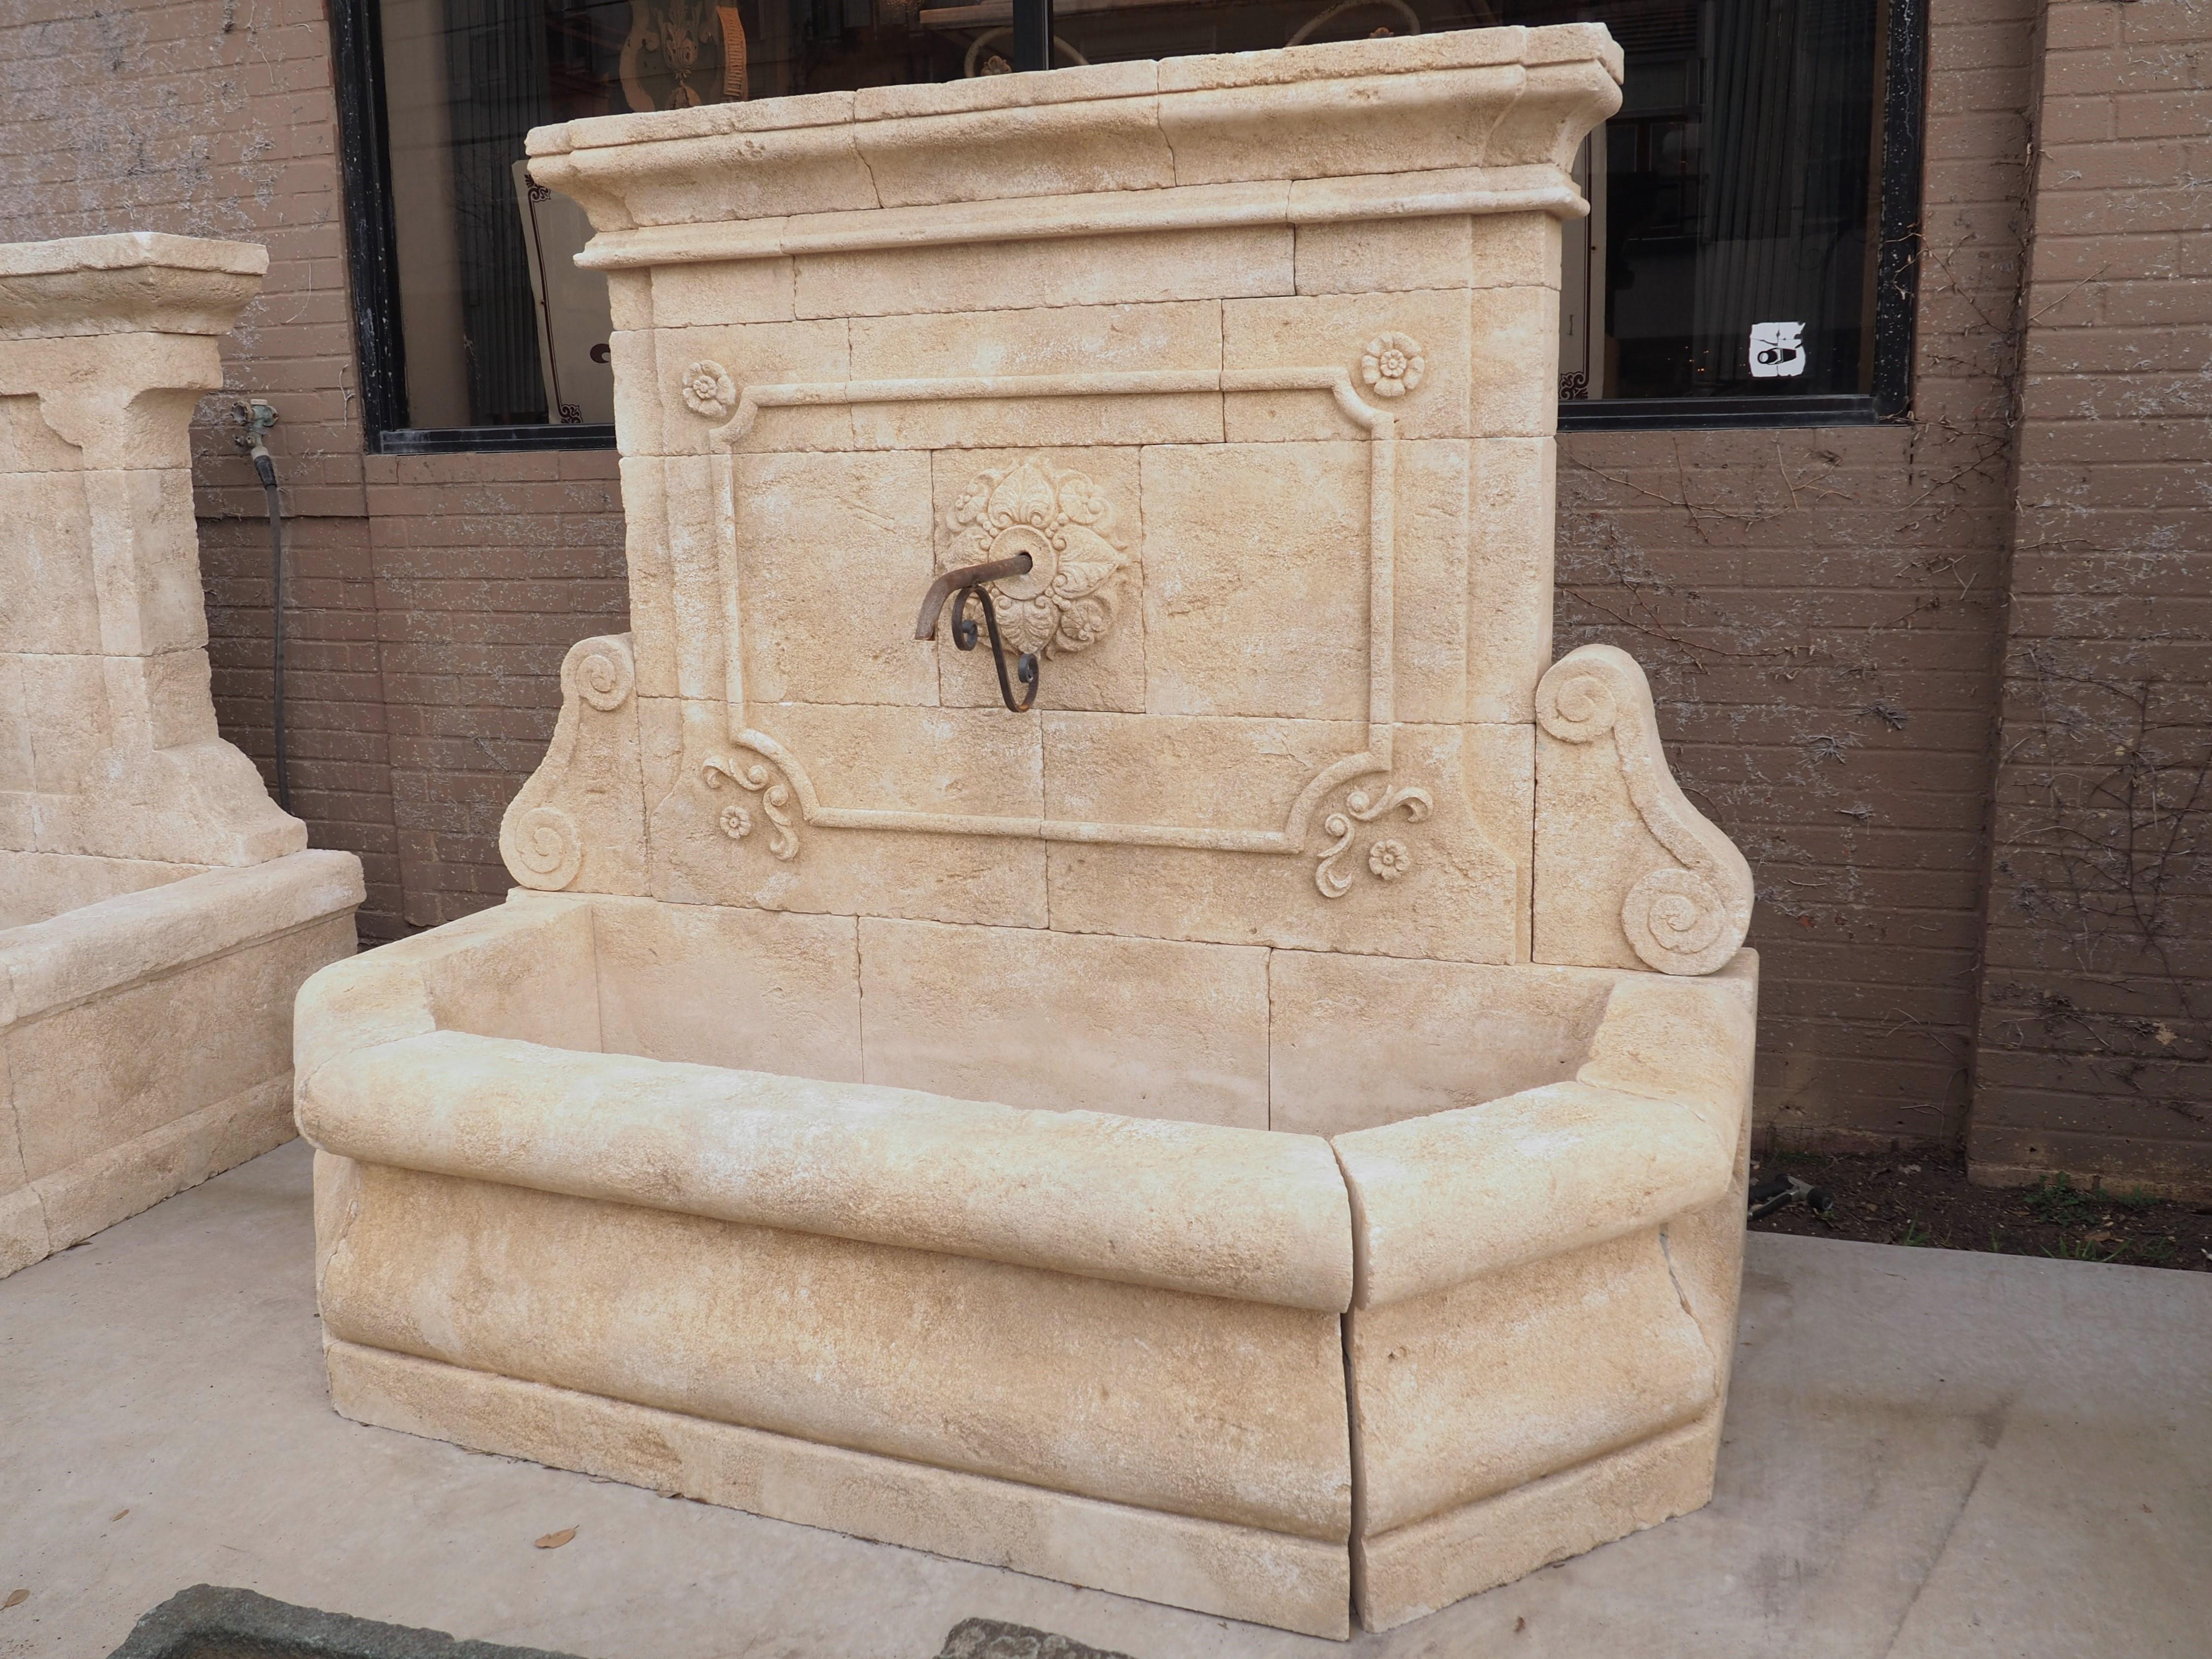 Hand carved in Vaucluse (Southeastern France), this majestic wall fountain is comprised of 22 pieces of Estaillade limestone. 16 Stones comprise the back wall, including the crown (three stones) and the volute scrolls at the base (two stones). Thick